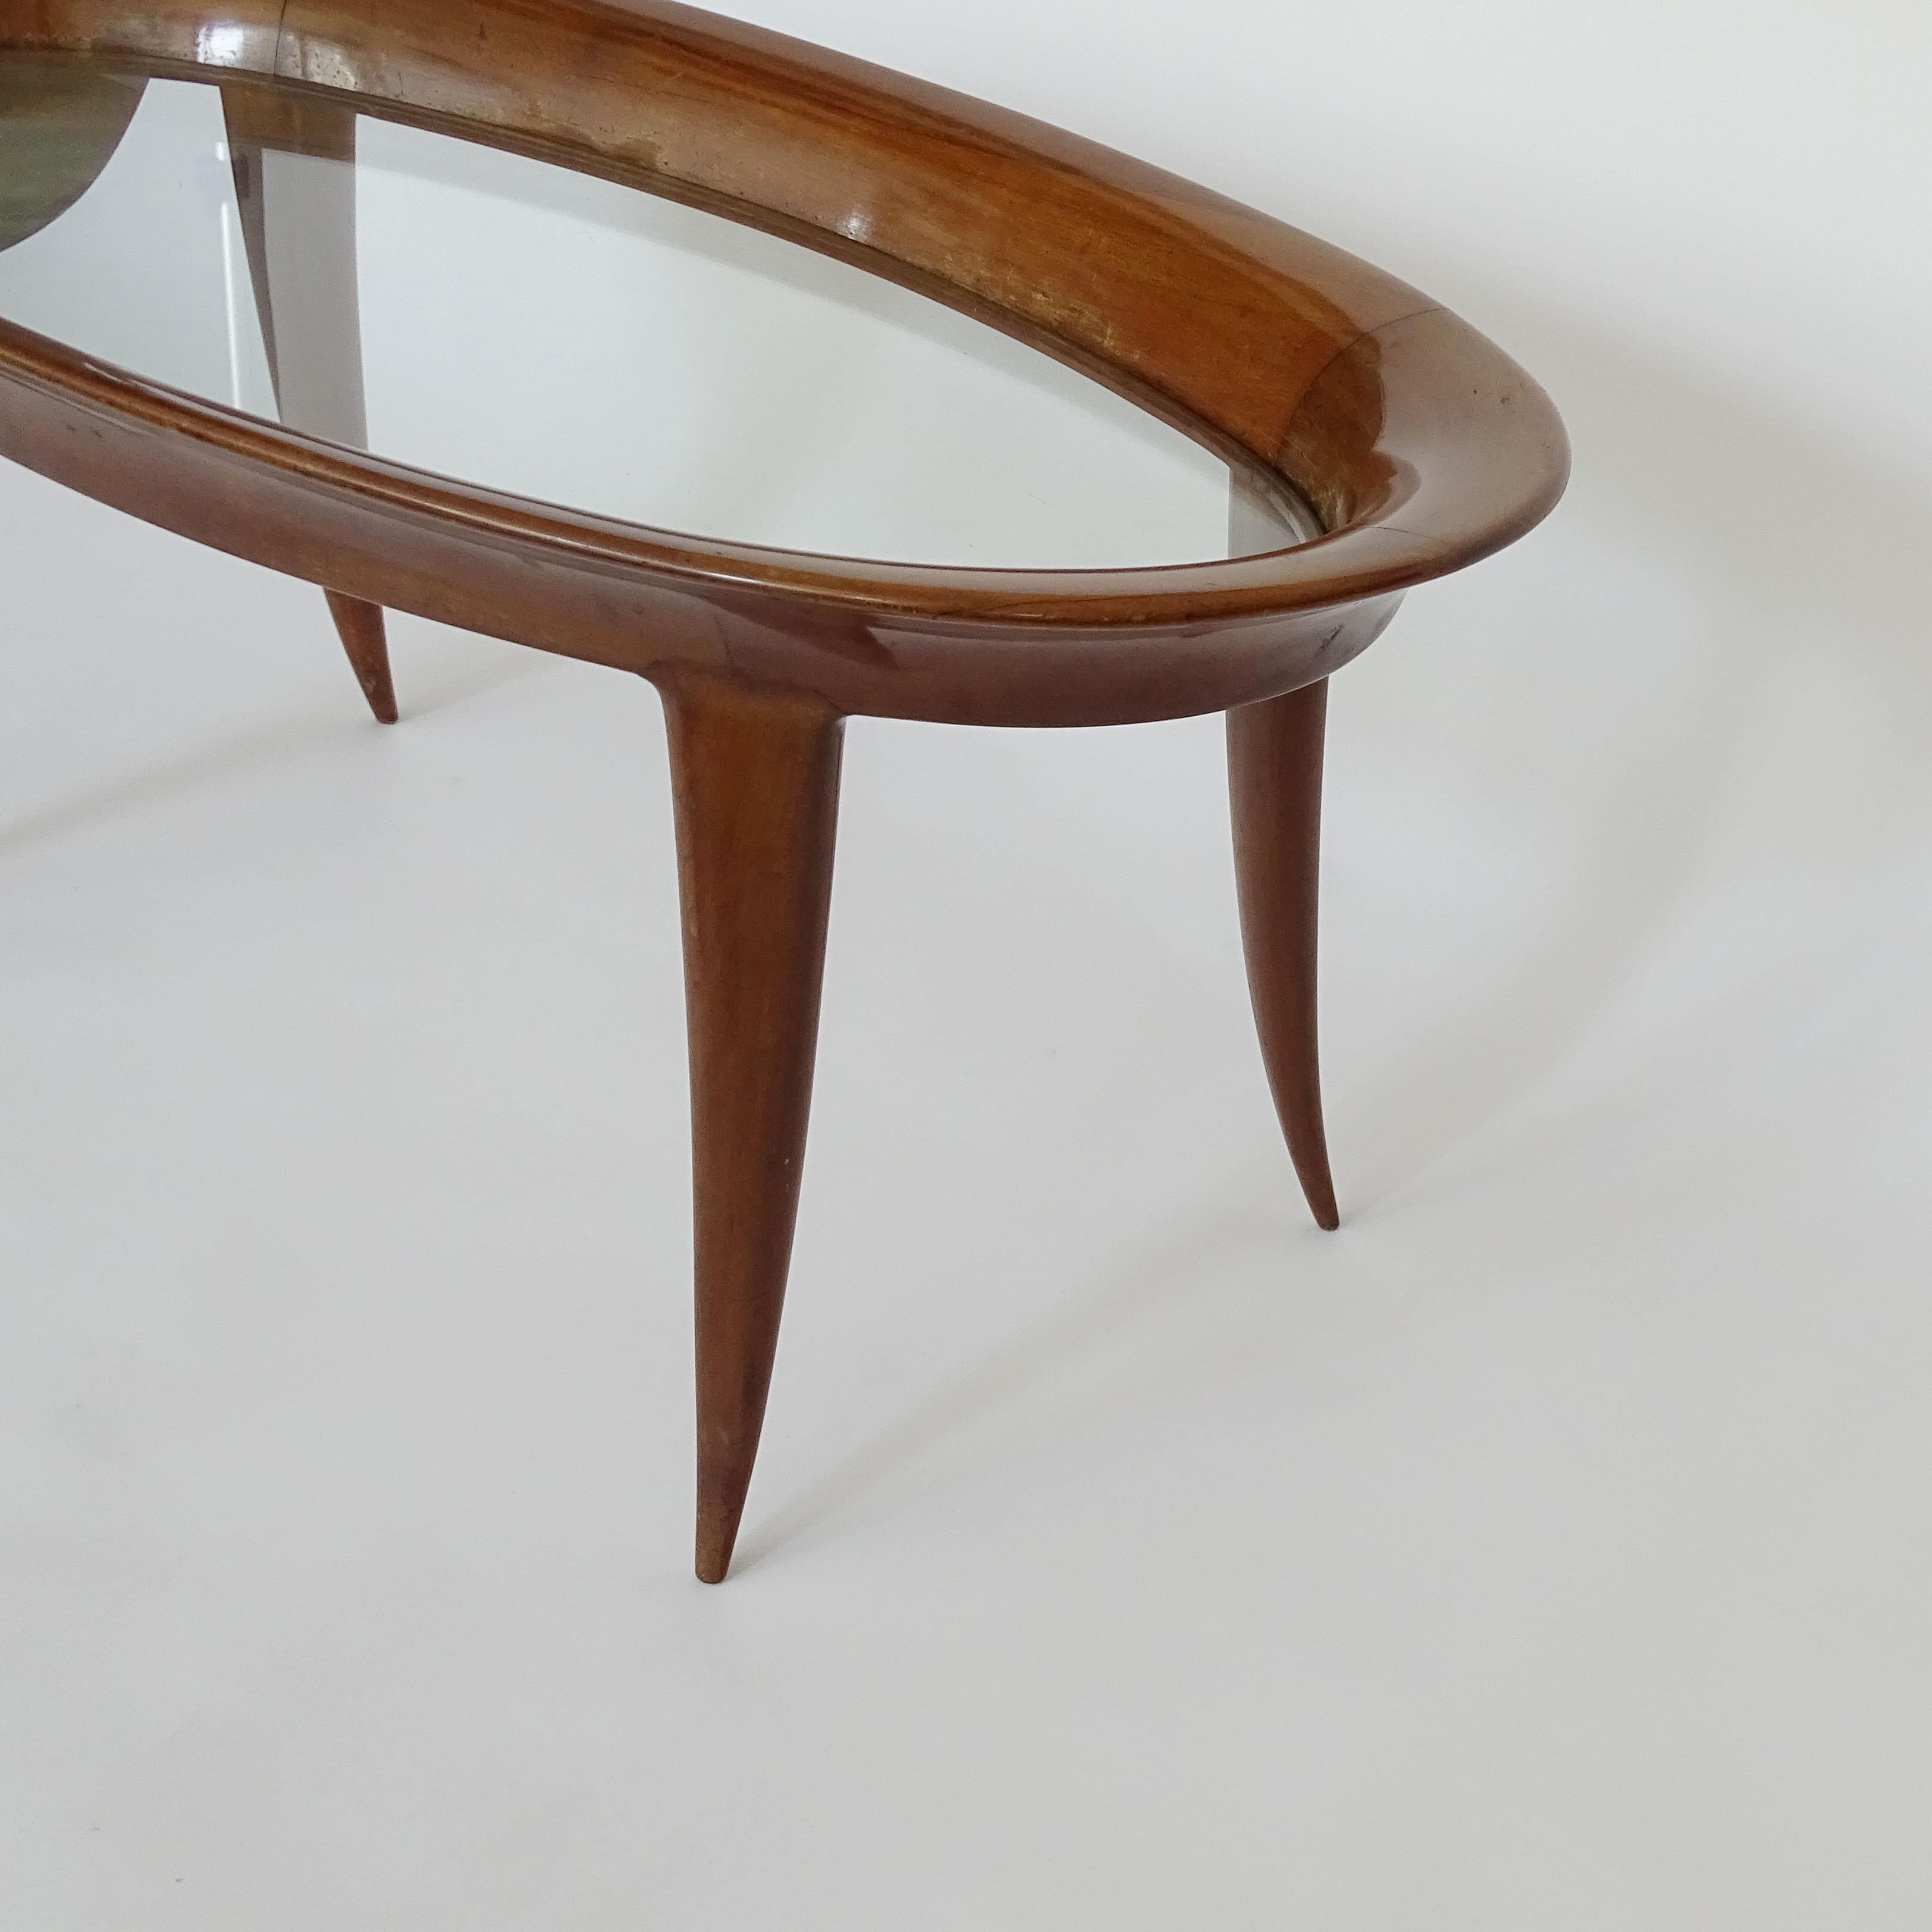 Italian 1940s Sculpted Oval Coffee Table Attributed to Fontana Arte For Sale 1